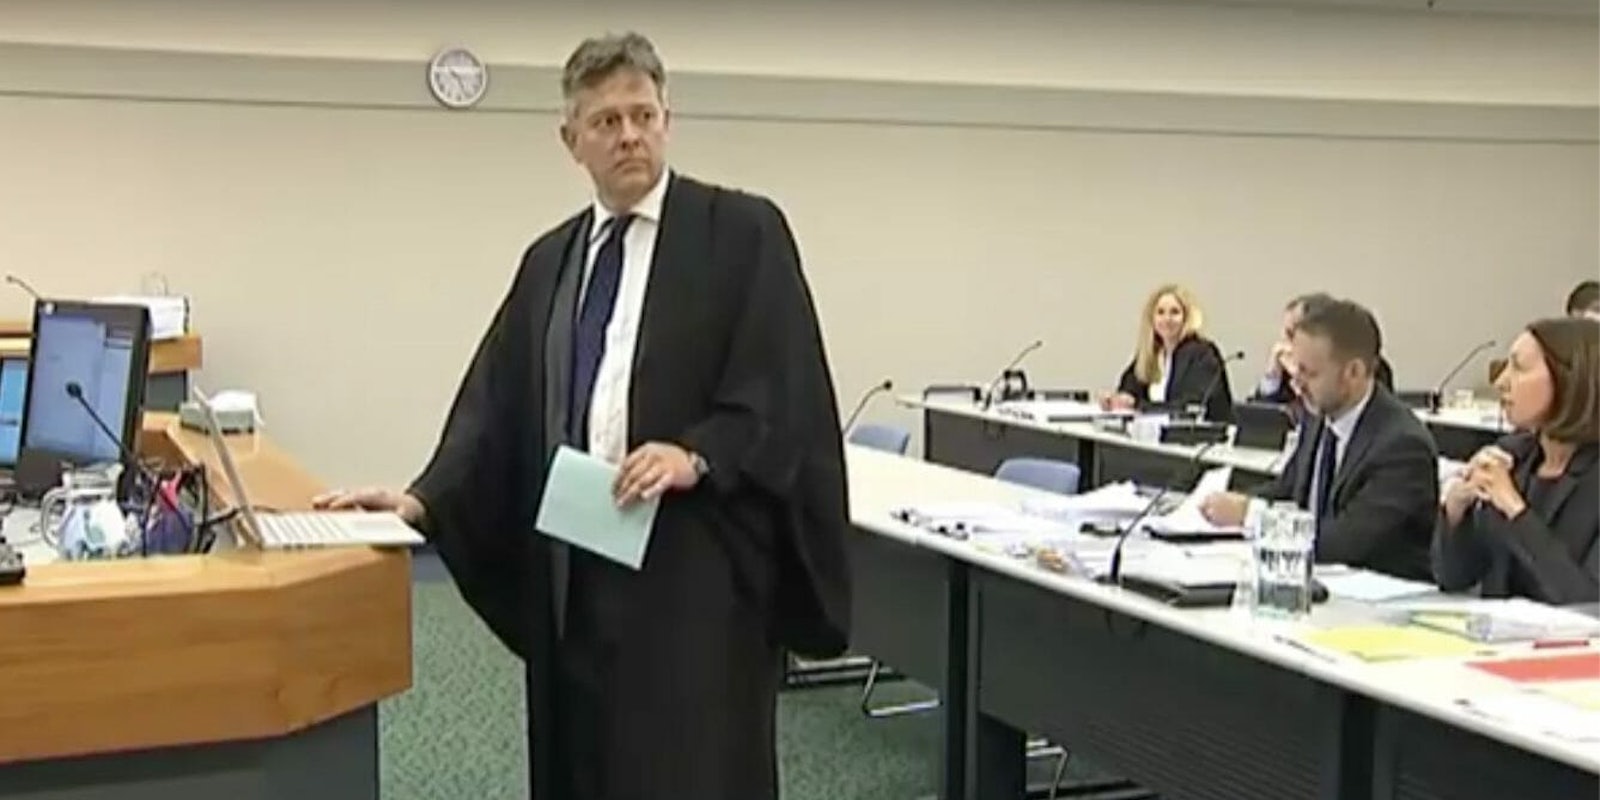 new zealand court listens to lose yourself by eminem